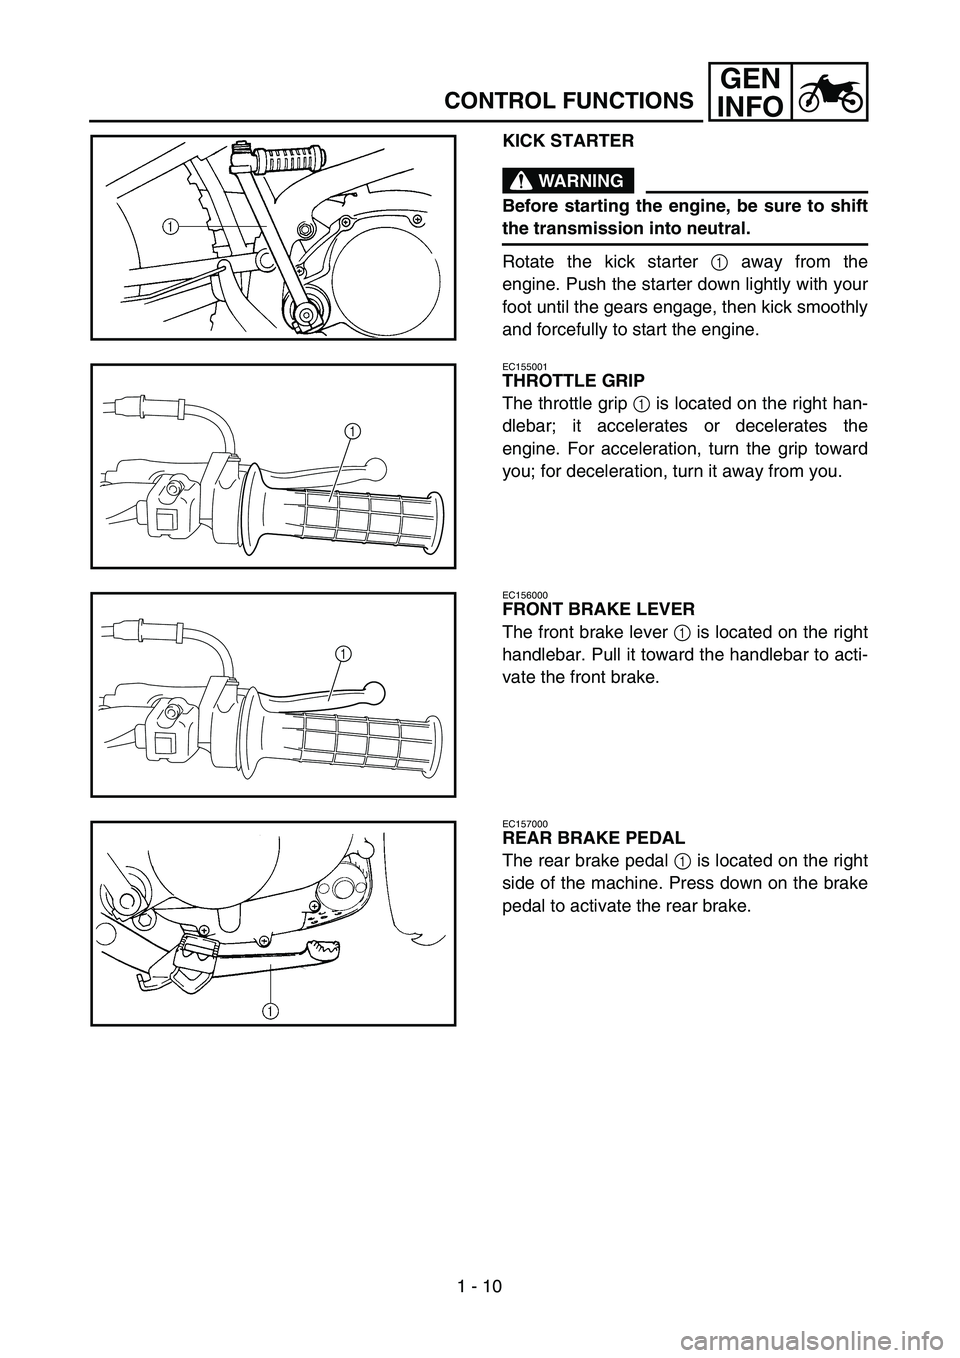 YAMAHA TTR90 2005  Owners Manual 1 - 10
GEN
INFO
CONTROL FUNCTIONS
KICK STARTER
WARNING
Before starting the engine, be sure to shift
the transmission into neutral.
Rotate the kick starter 1 away from the
engine. Push the starter down